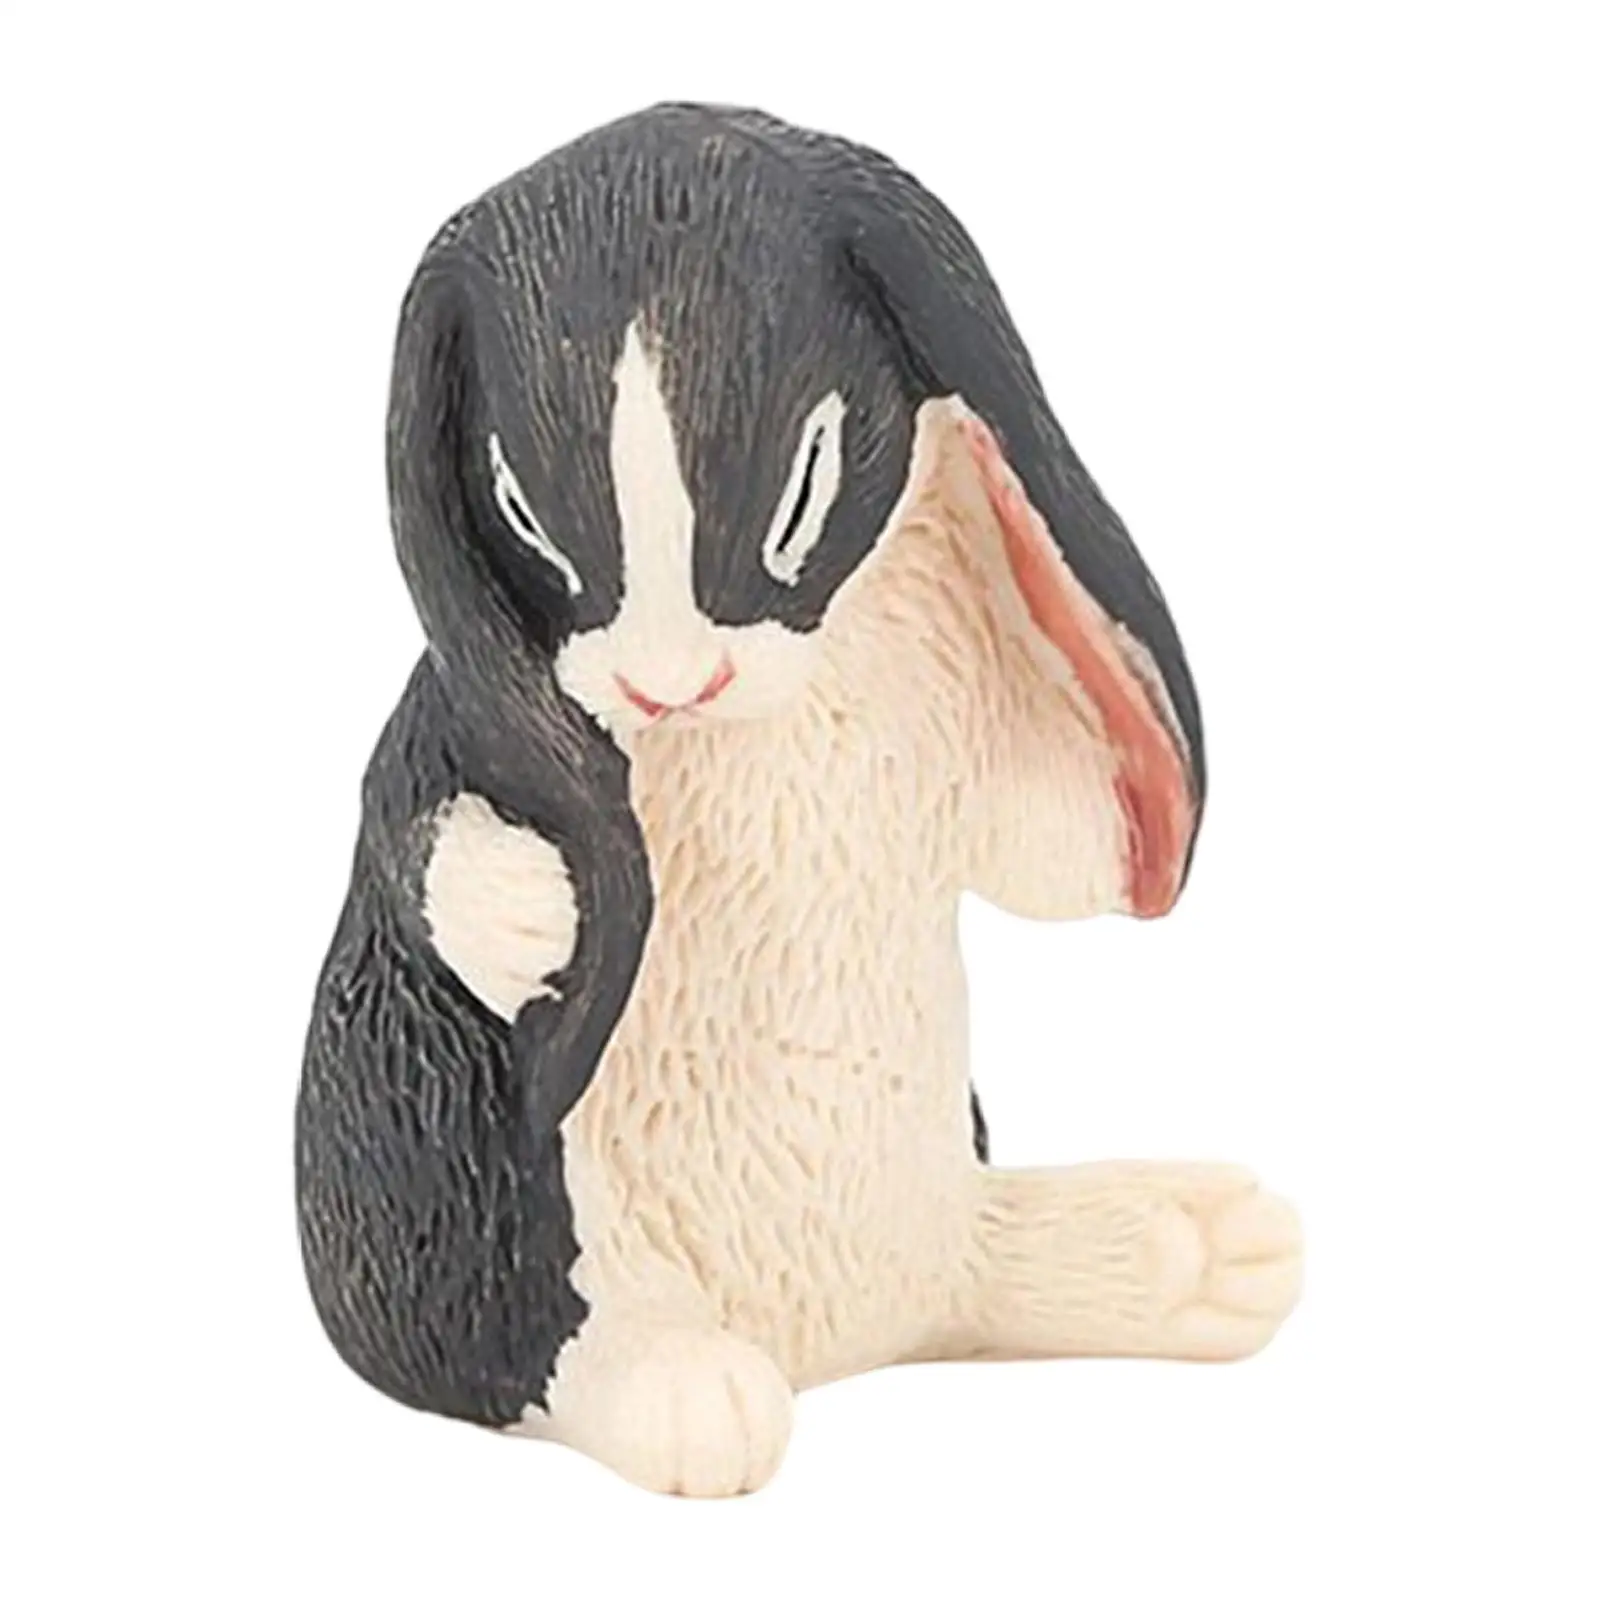 Rabbit Toy Figure Realistic Cute Lop-Eared Rabbit Decor Animal Figures for 3-8 Years Old